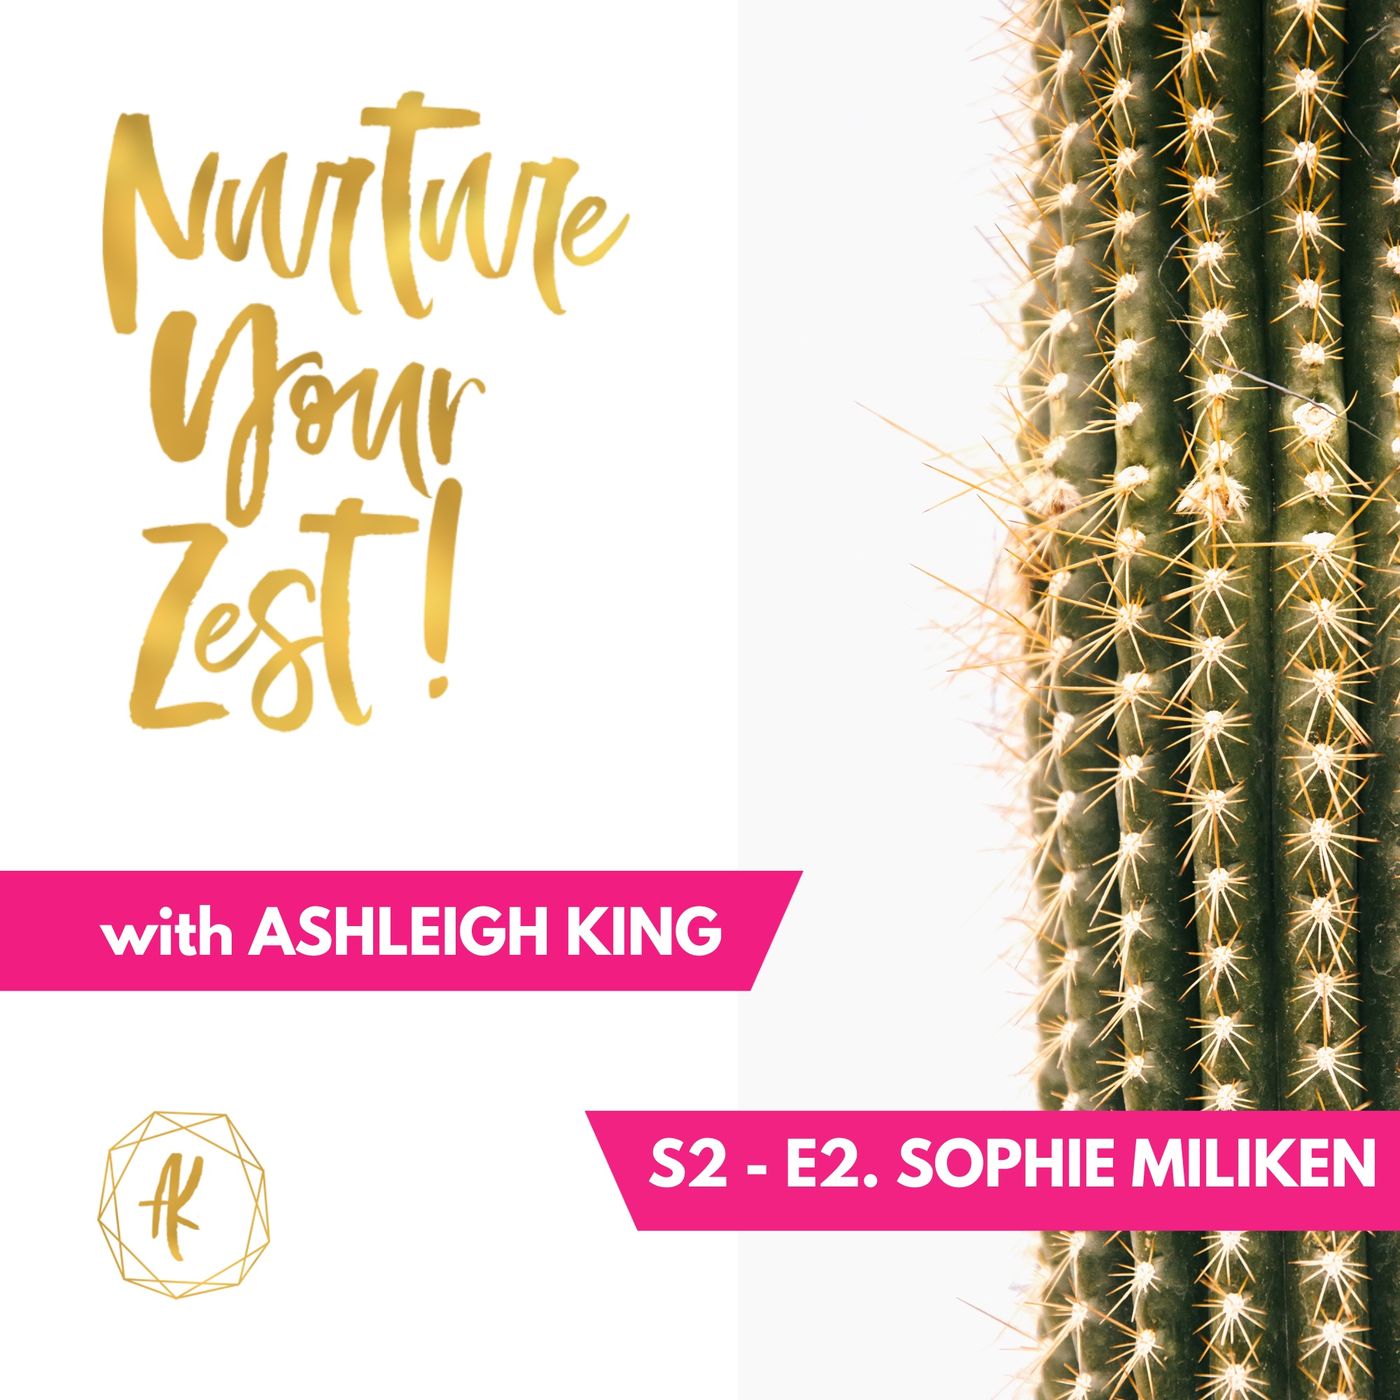 #Nurture Your Zest-S2-E2. Sophie Milliken on building your empire and taking risks with your host Ashleigh King